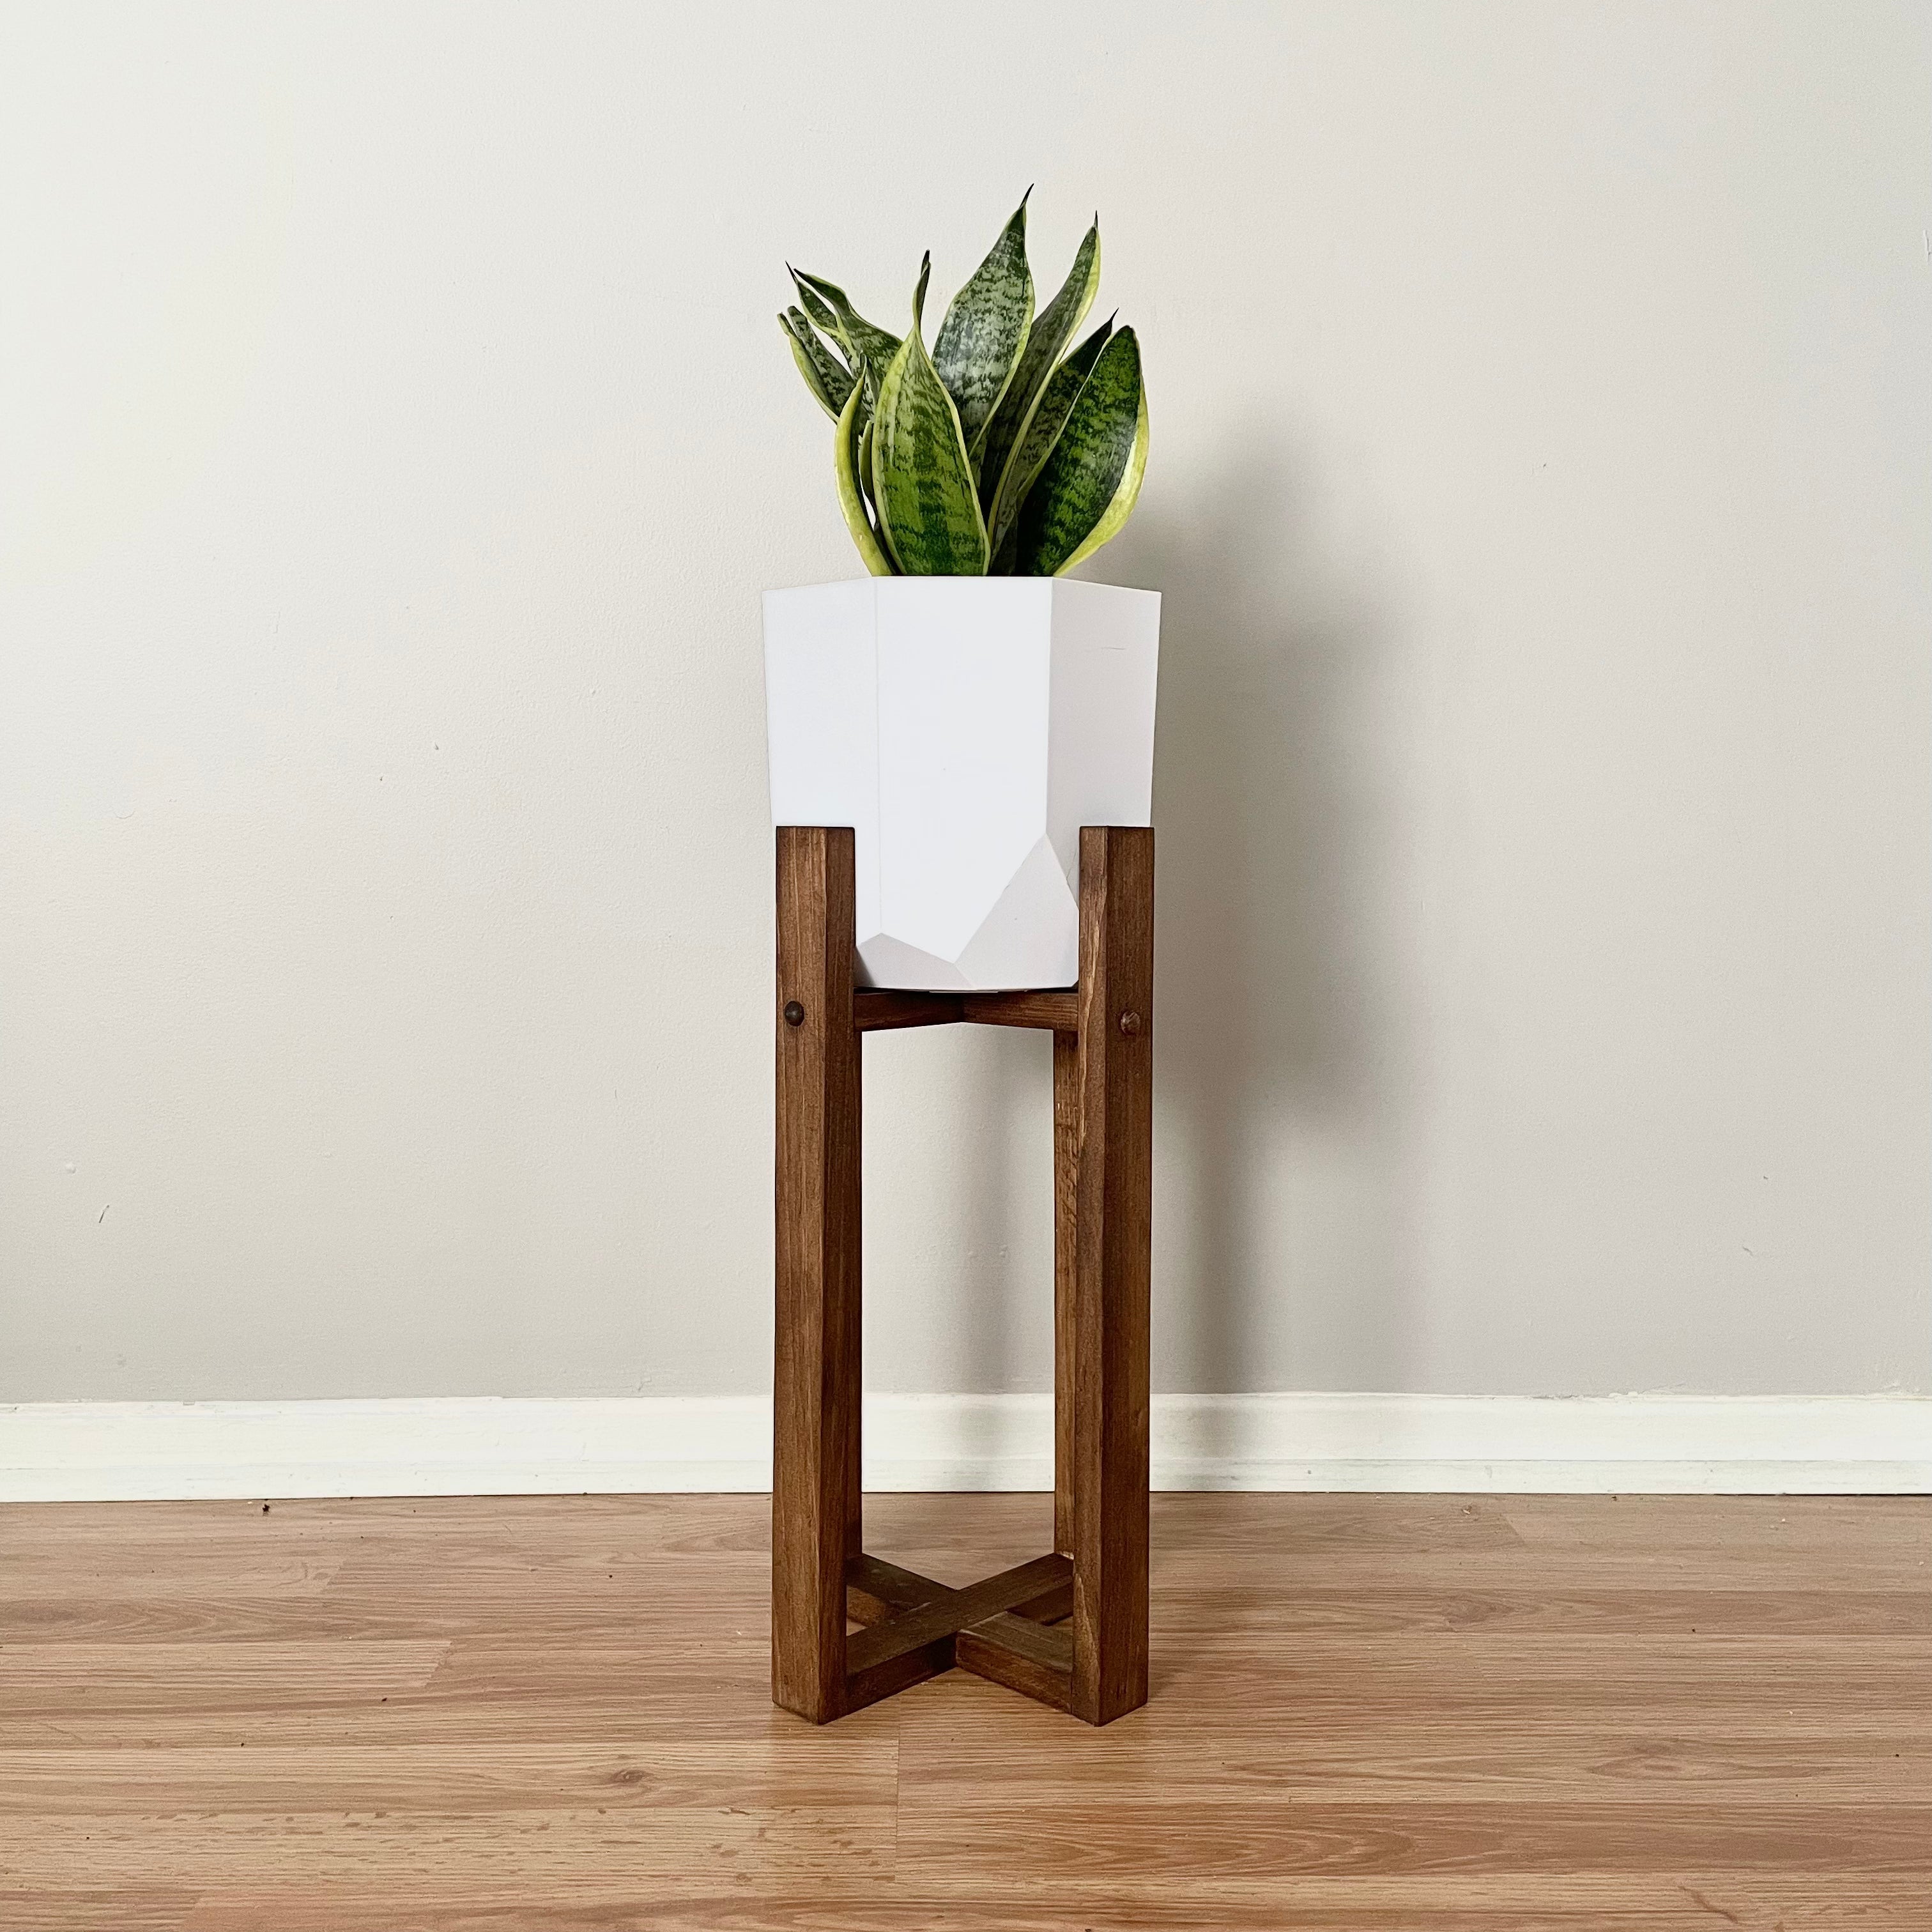 MEDIUM Rustic Stained Plant Stand Project Pine Designs Medium Plant Stand + 8" Plant Pot 